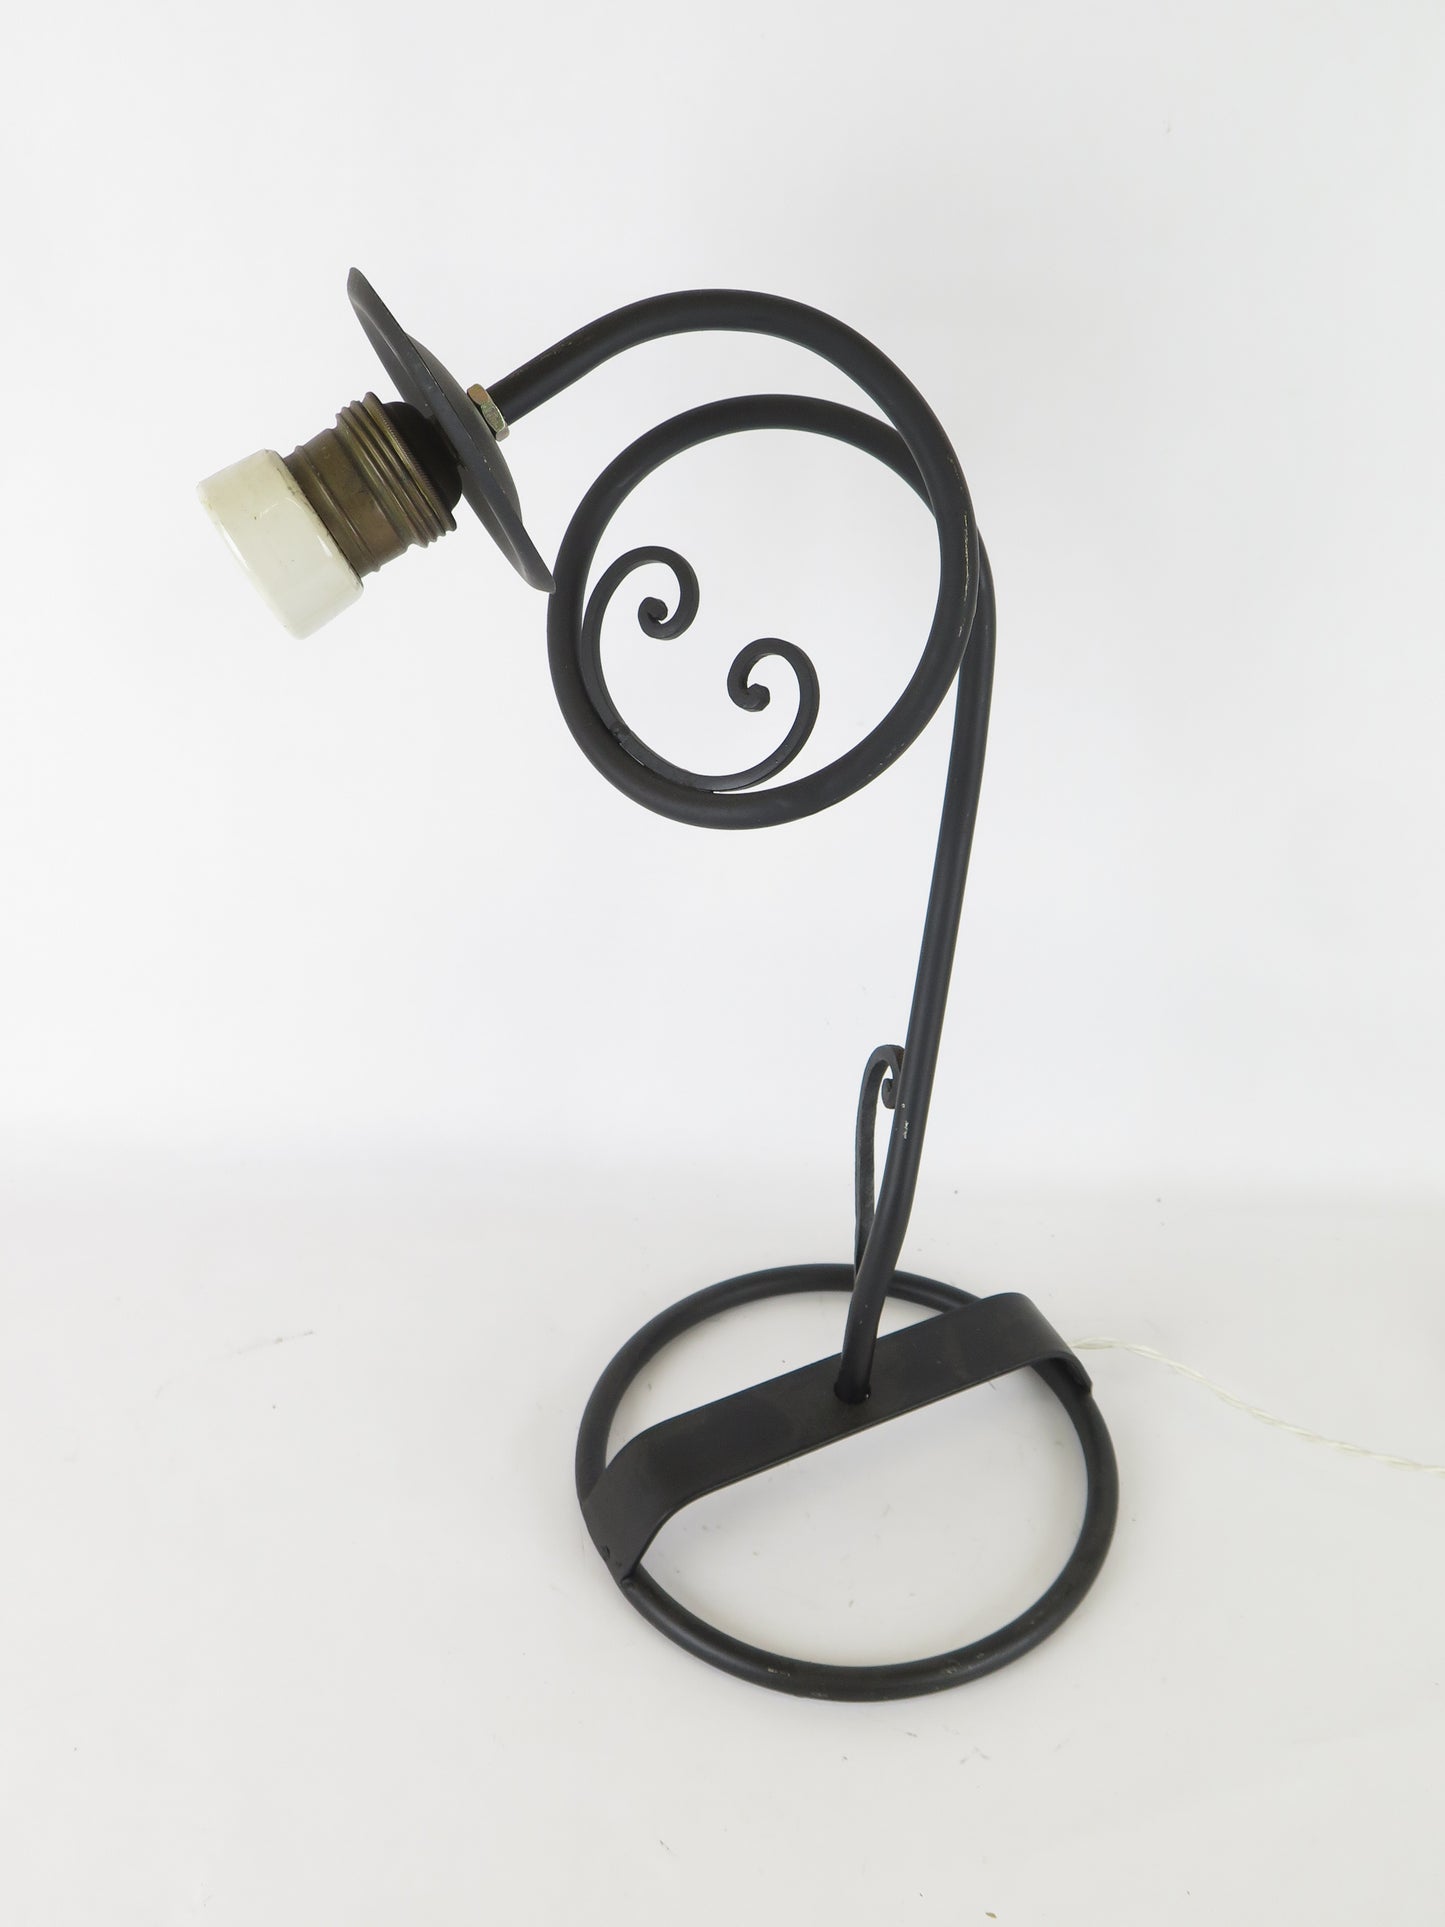 TABLE LAMP IN METAL AND WROUGHT IRON VINTAGE CIRCULAR DESIGN ARTE CH1